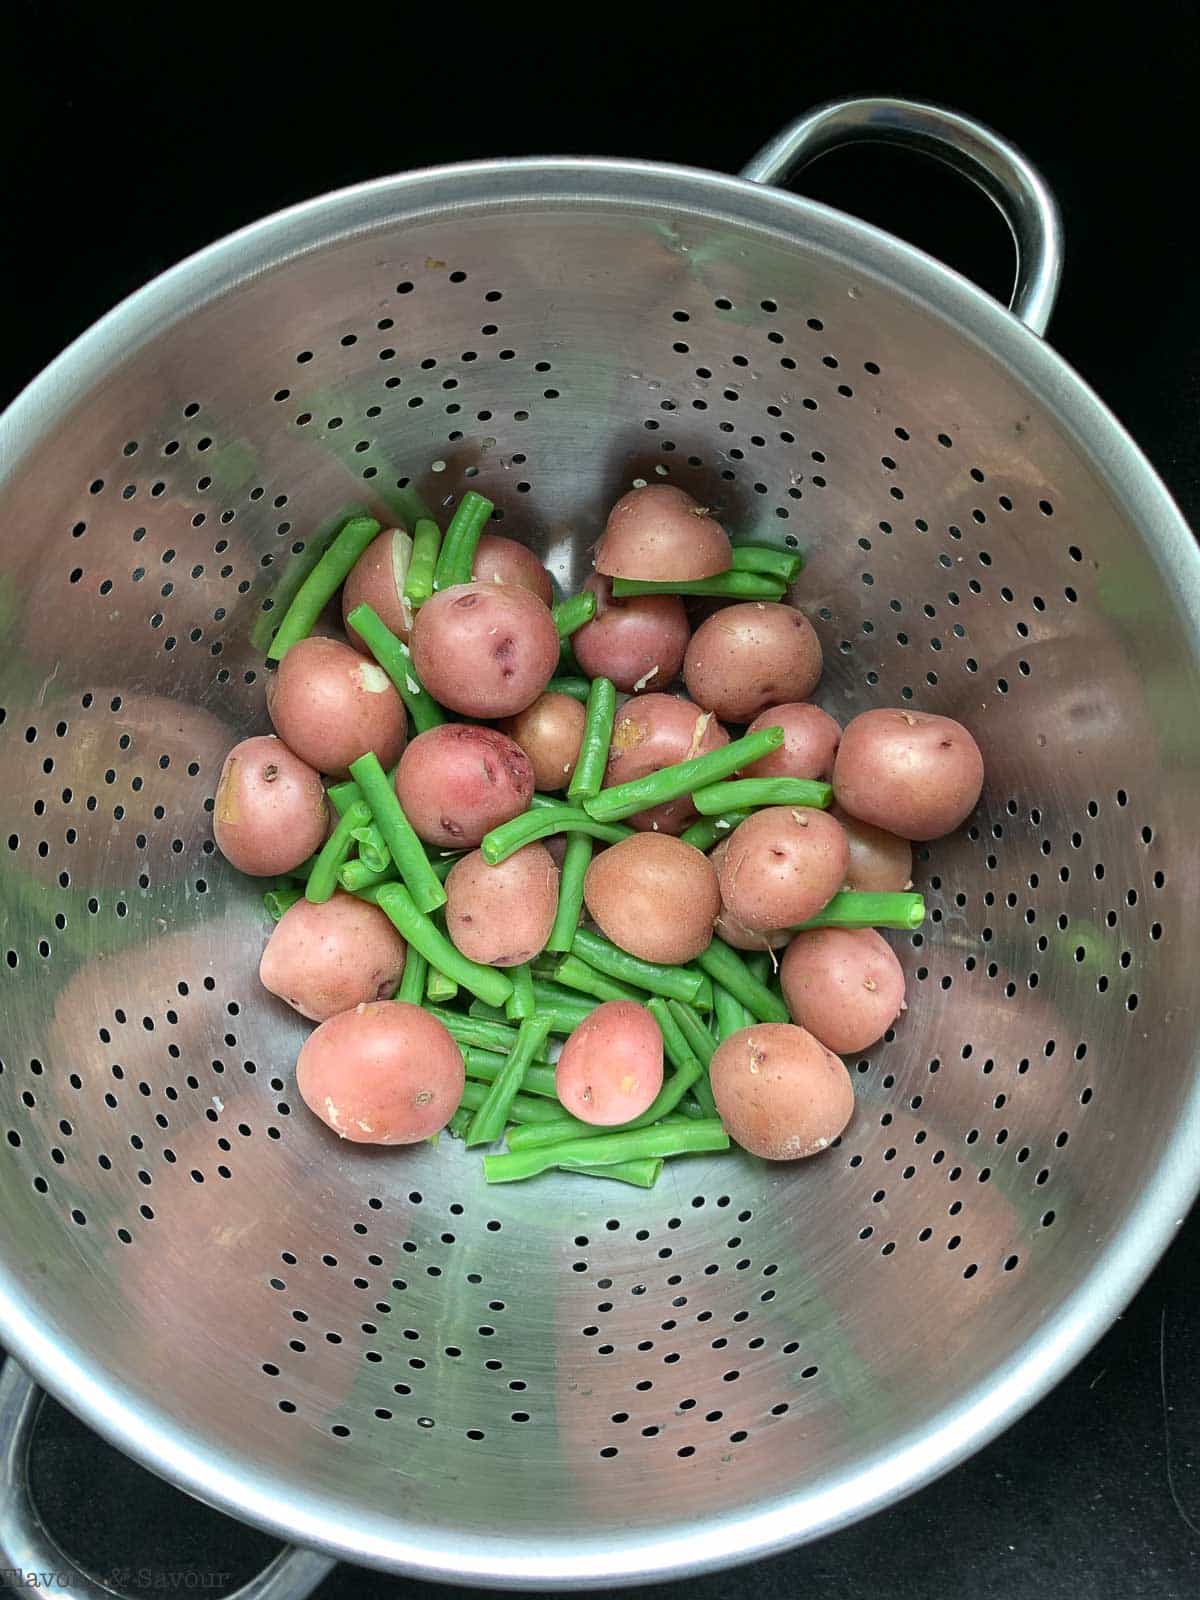 draining cooking green beans and baby potatoes in a colander.